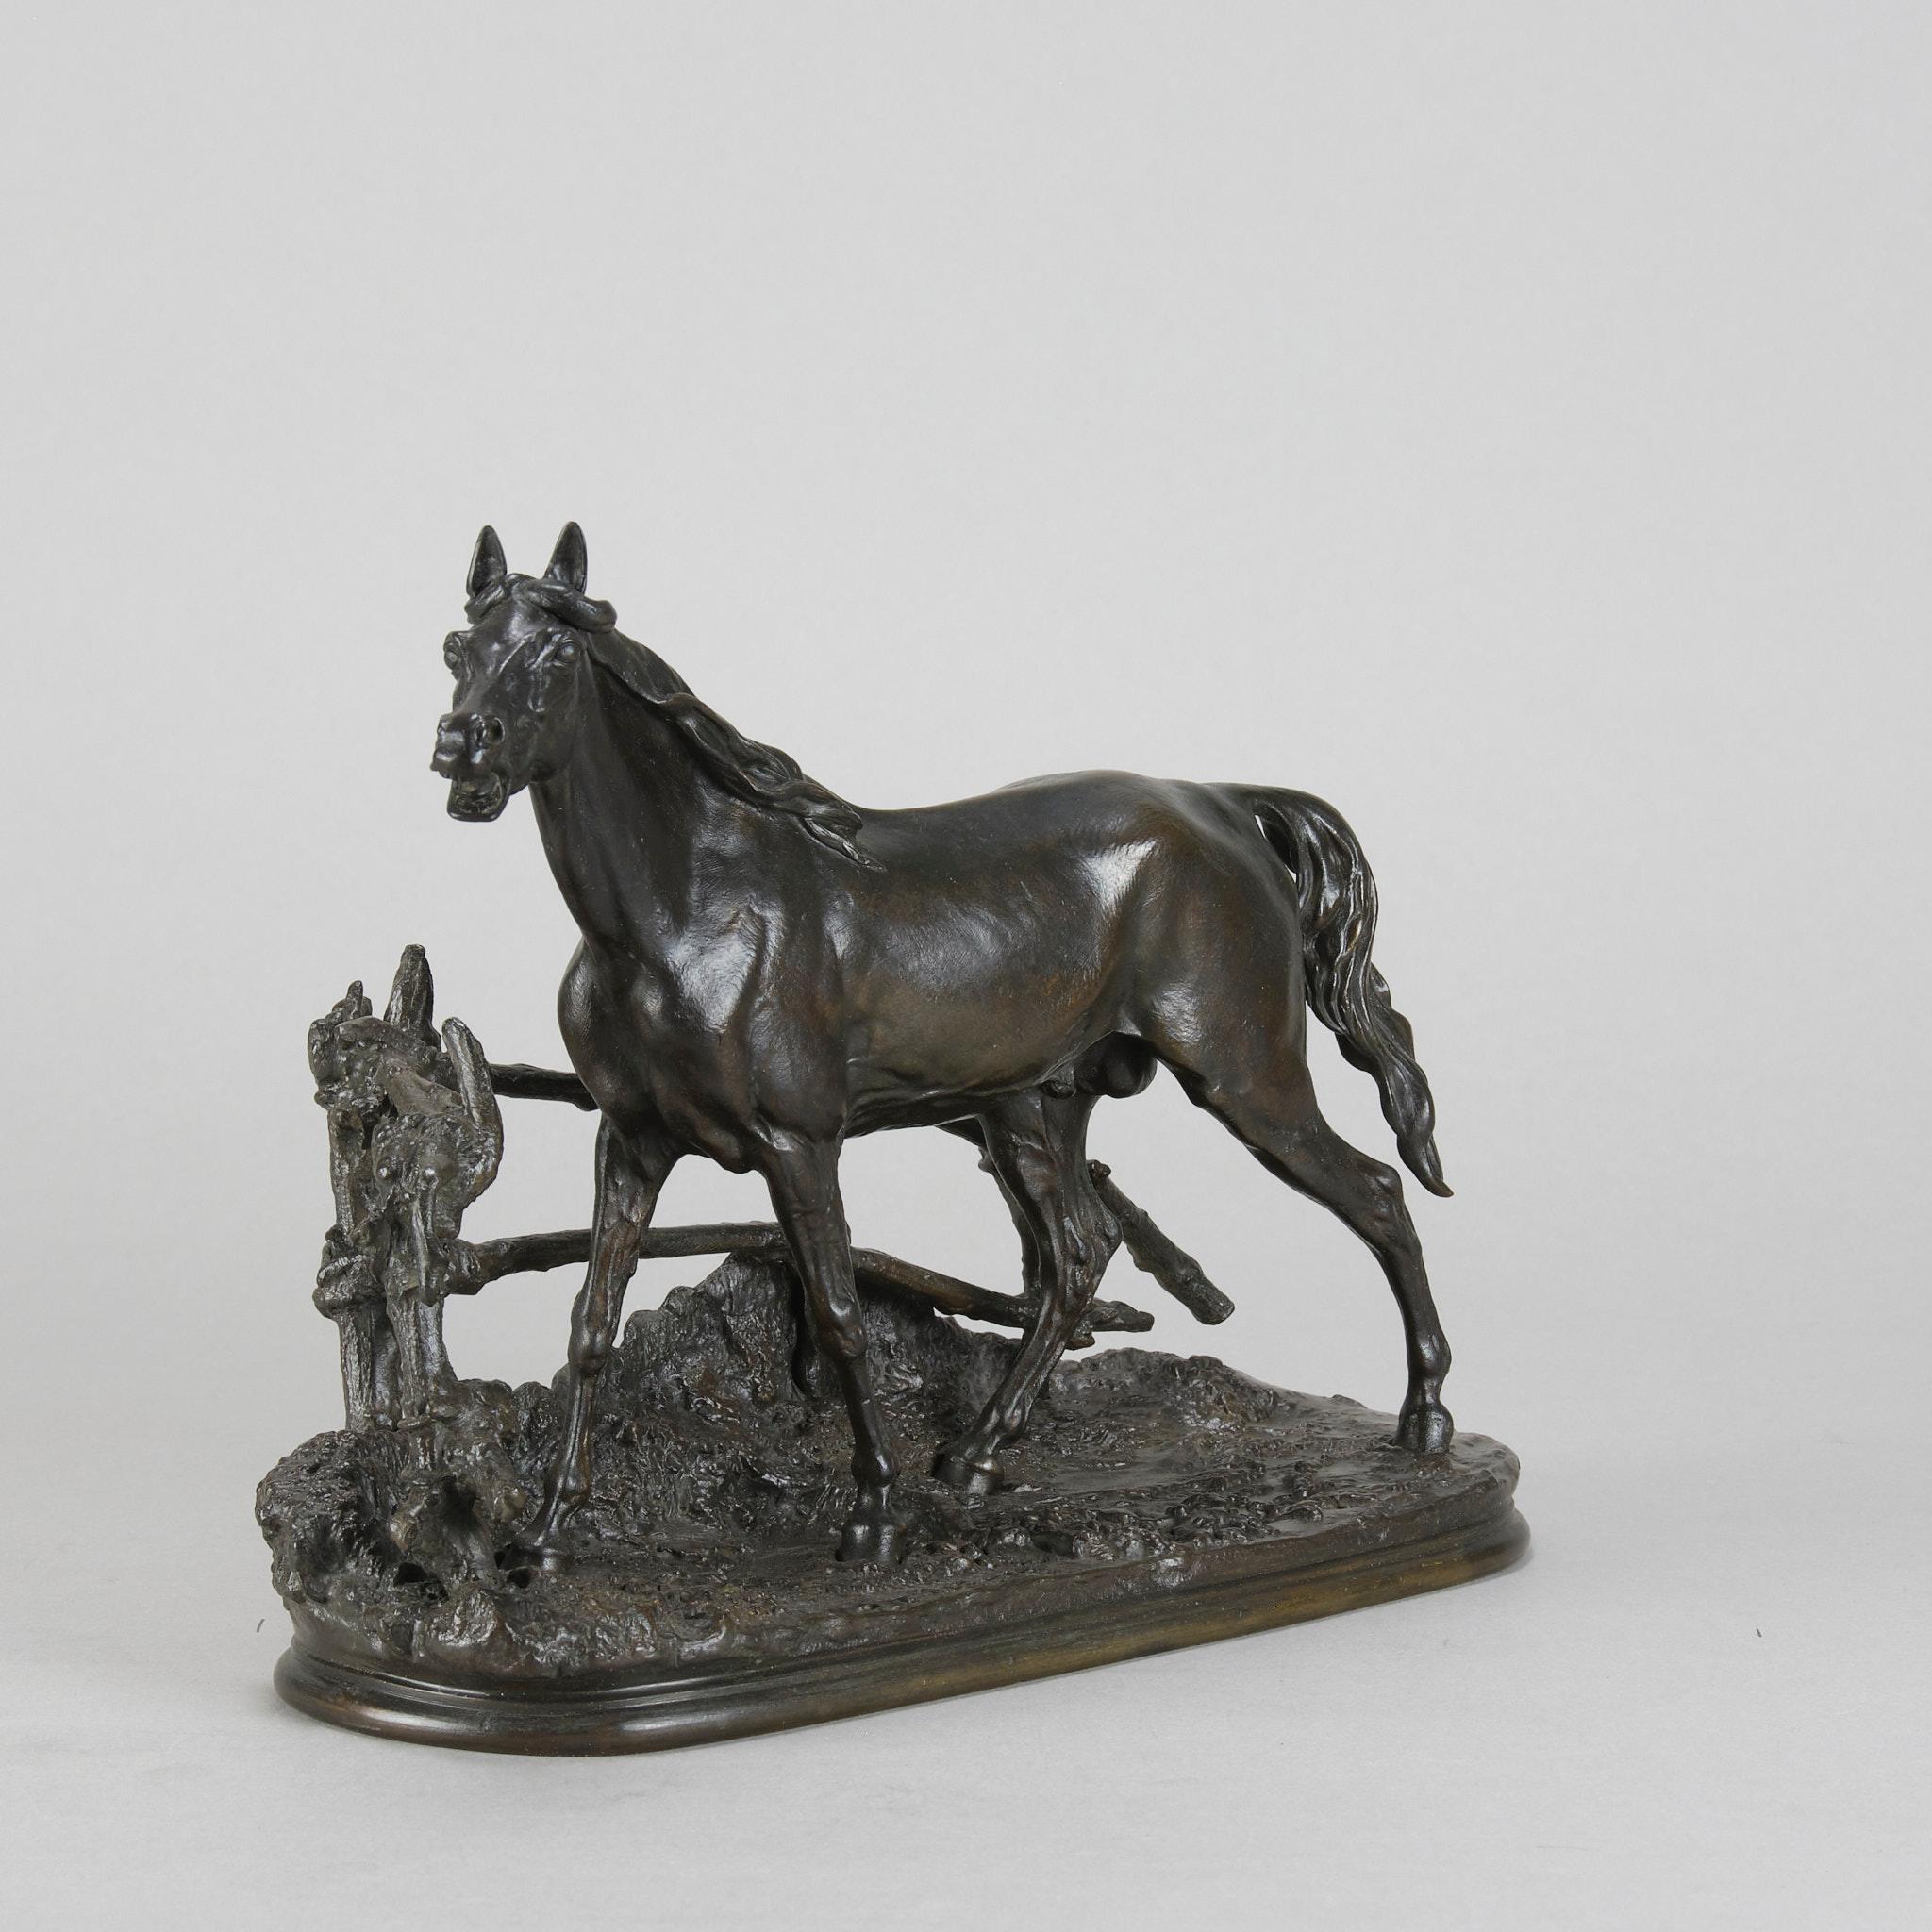 A very fine French Animaliers bronze study of a stallion standing behind a post and rail fence exhibiting excellent hand finished surface detail and good colour, entitled ‘Djinn Etlalon Barbe’, signed P.J Mêne

This model is the rare smaller size